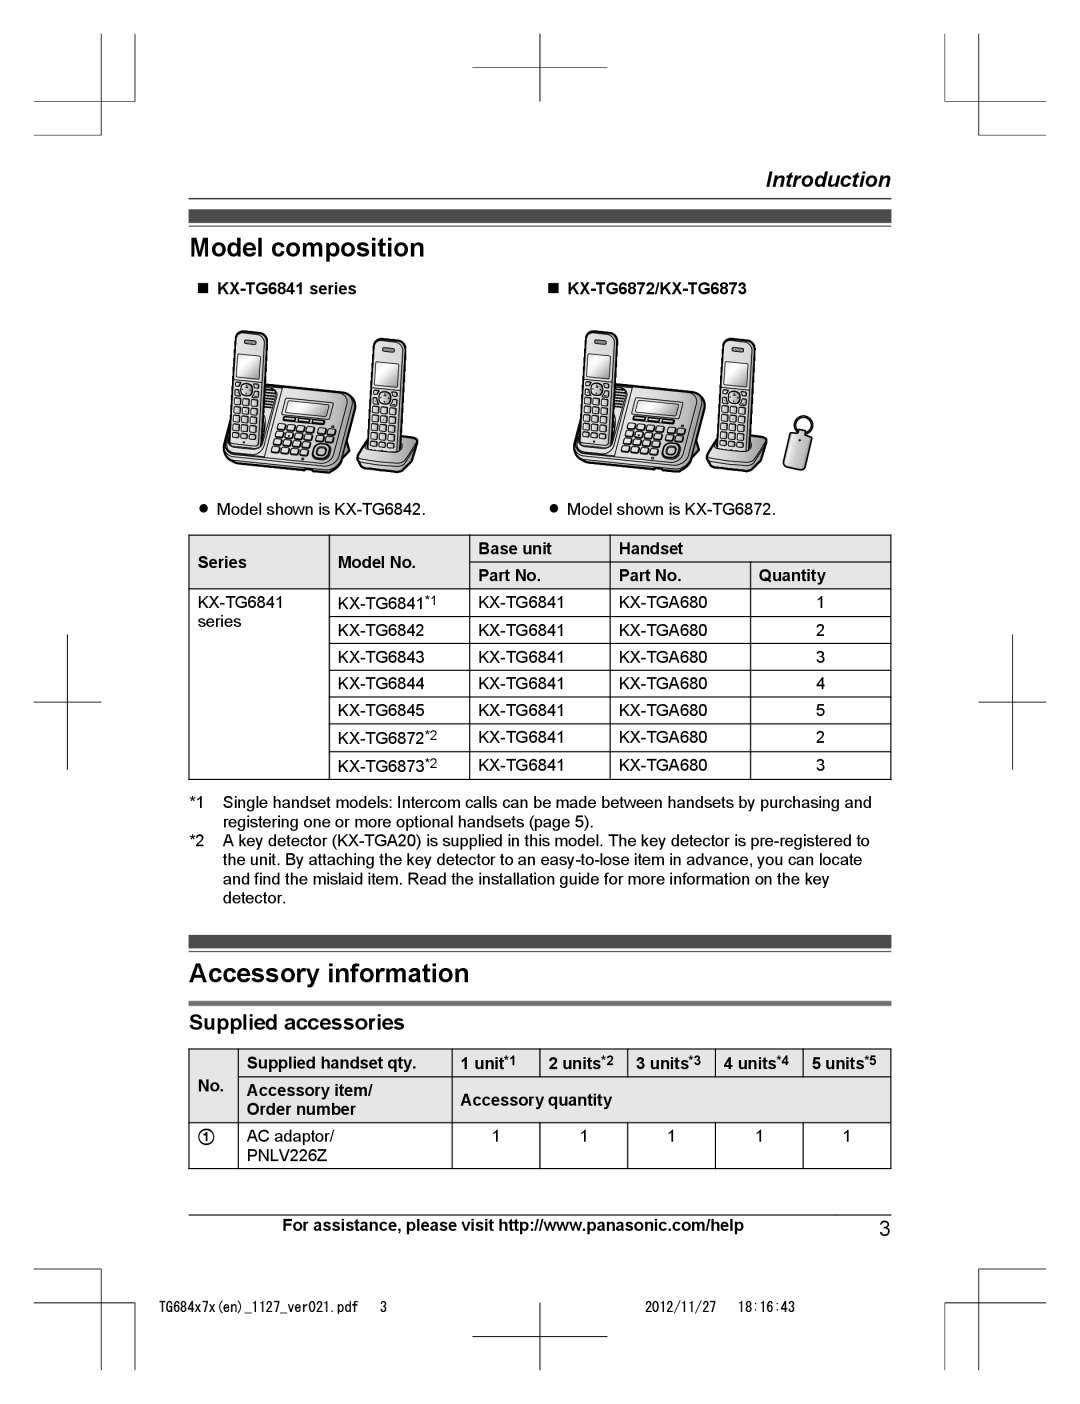 Panasonic KX-TG6845, KX-TG6873, KX-TG6872 Model composition, Accessory information, Introduction, Supplied accessories 